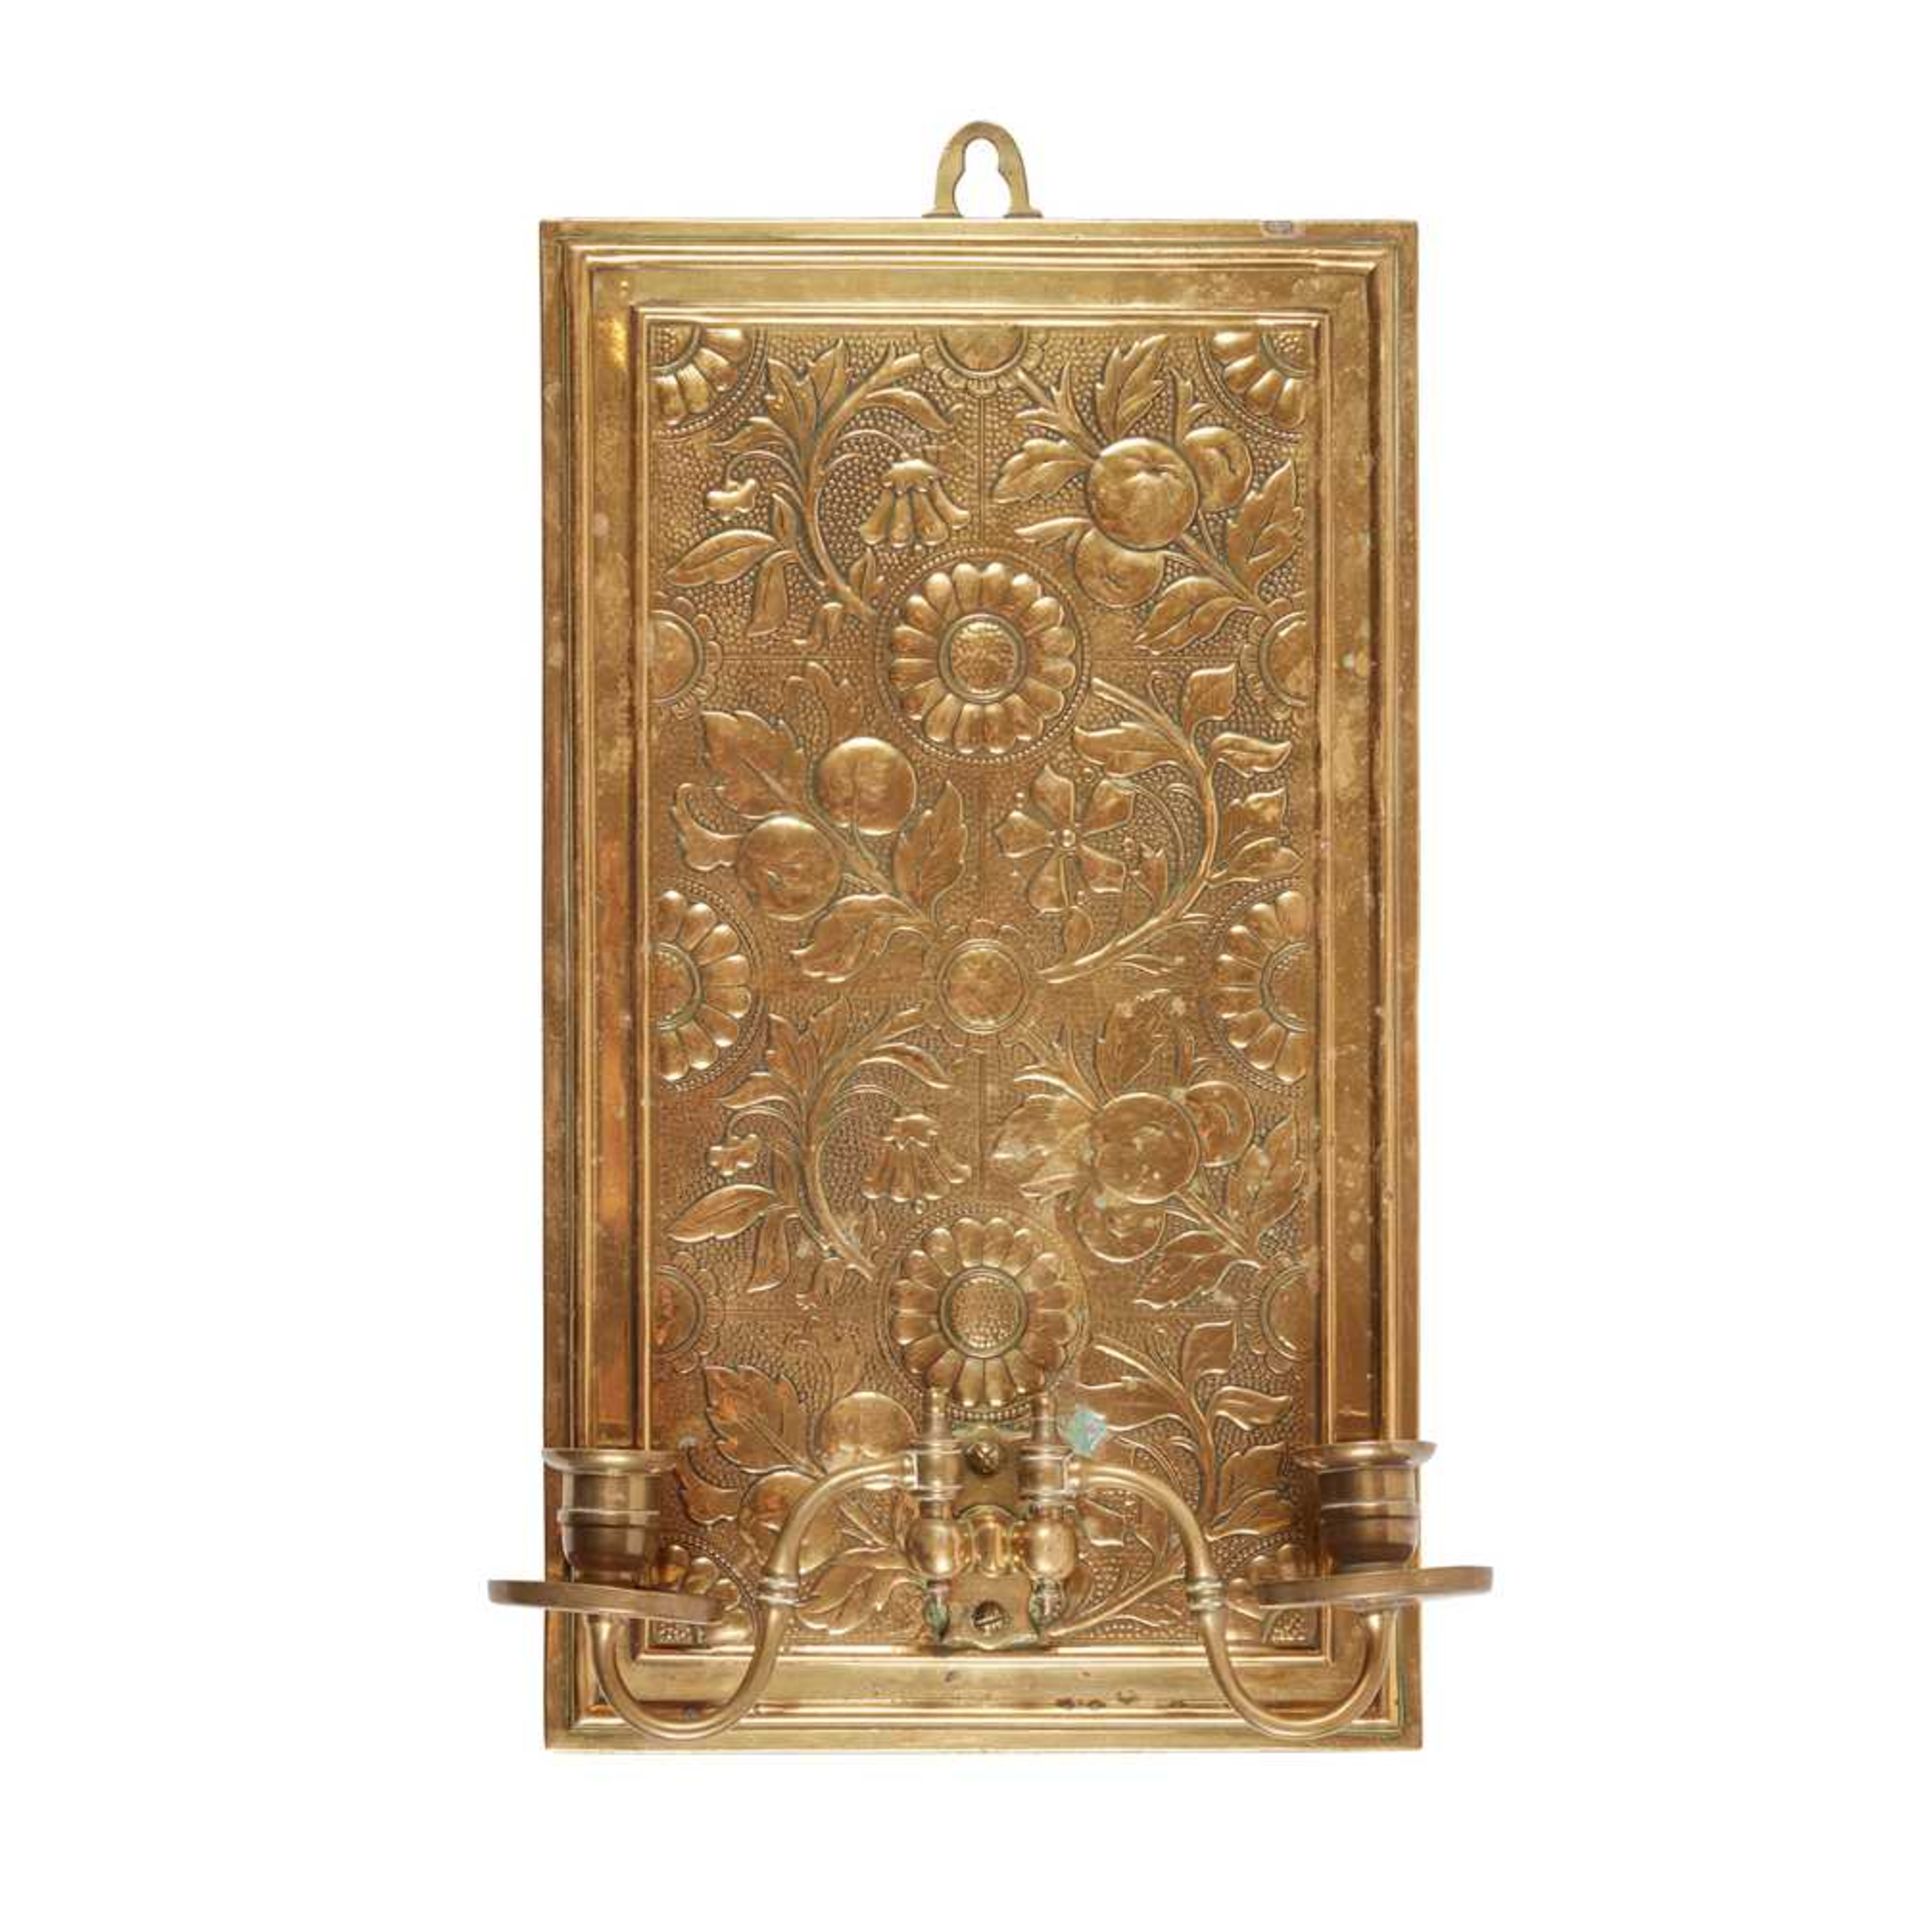 MANNER OF BRUCE TALBERT PAIR OF AESTHETIC MOVEMENT WALL SCONCES, CIRCA 1876 - Image 3 of 3